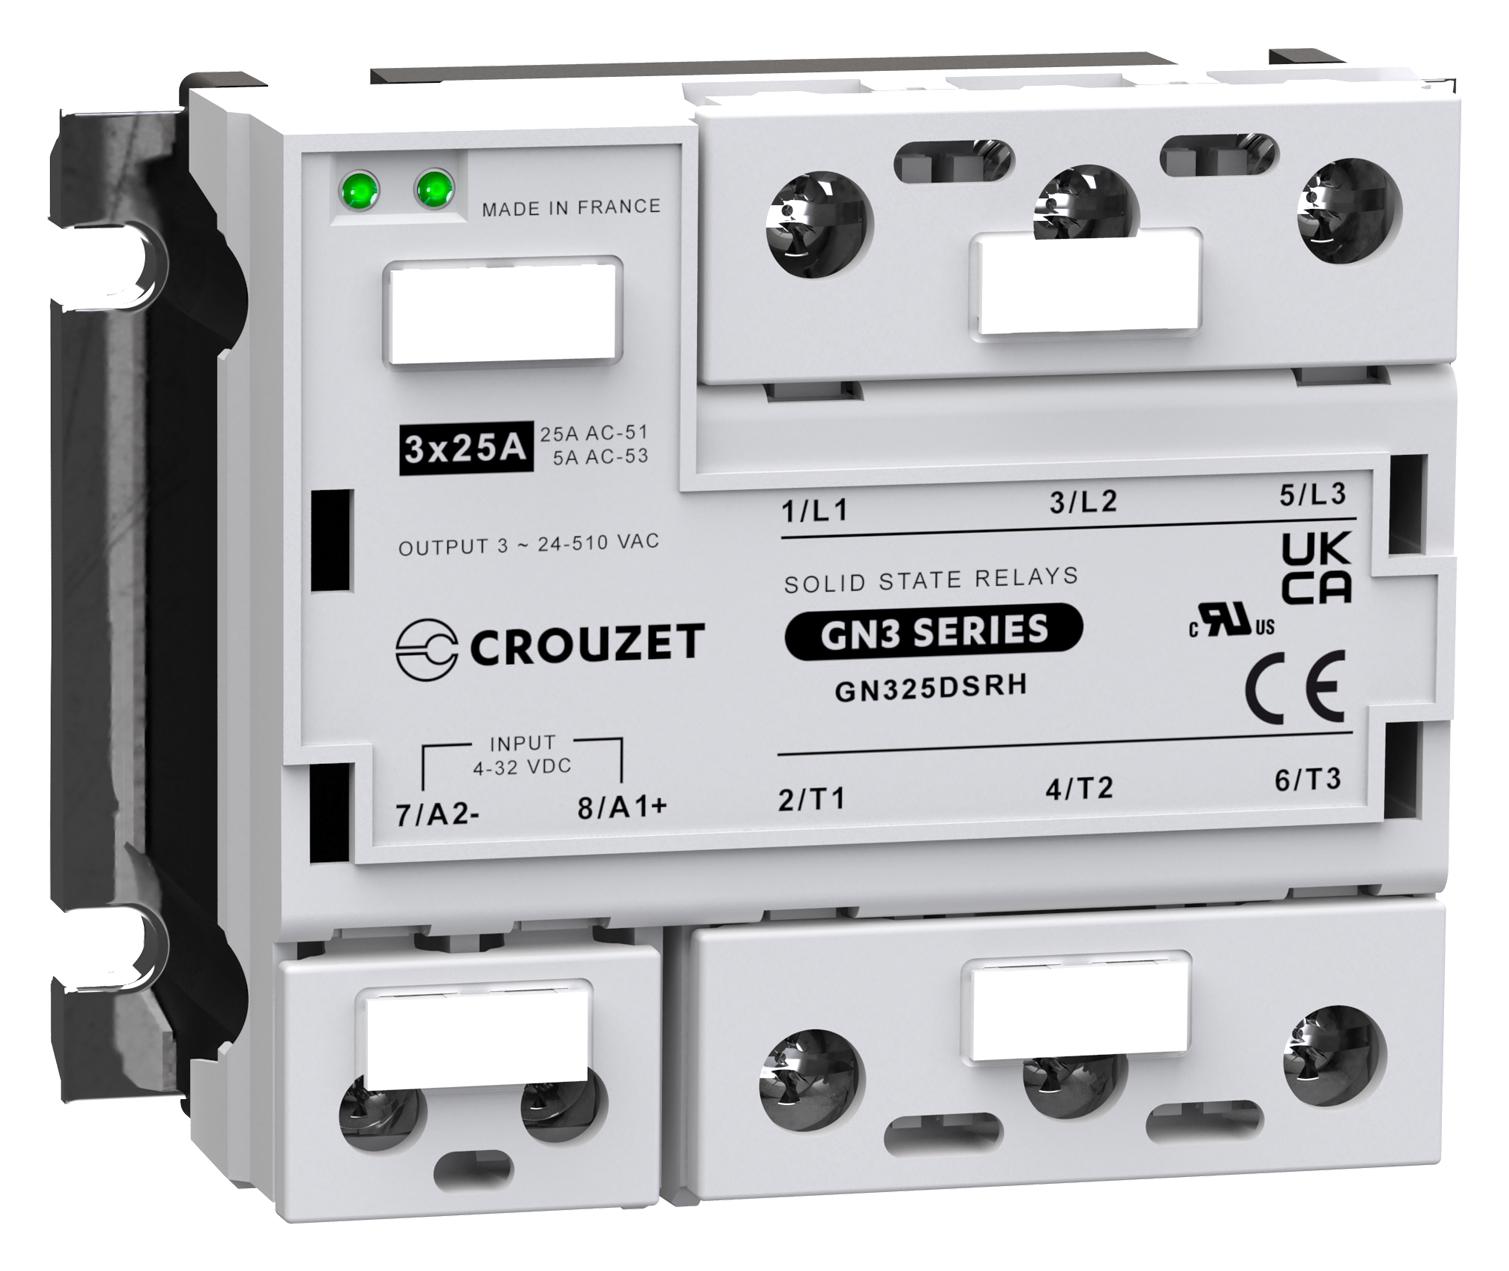 Crouzet Gn325Dsrh Solid State Relay, 25A, 4-32Vdc, Panel